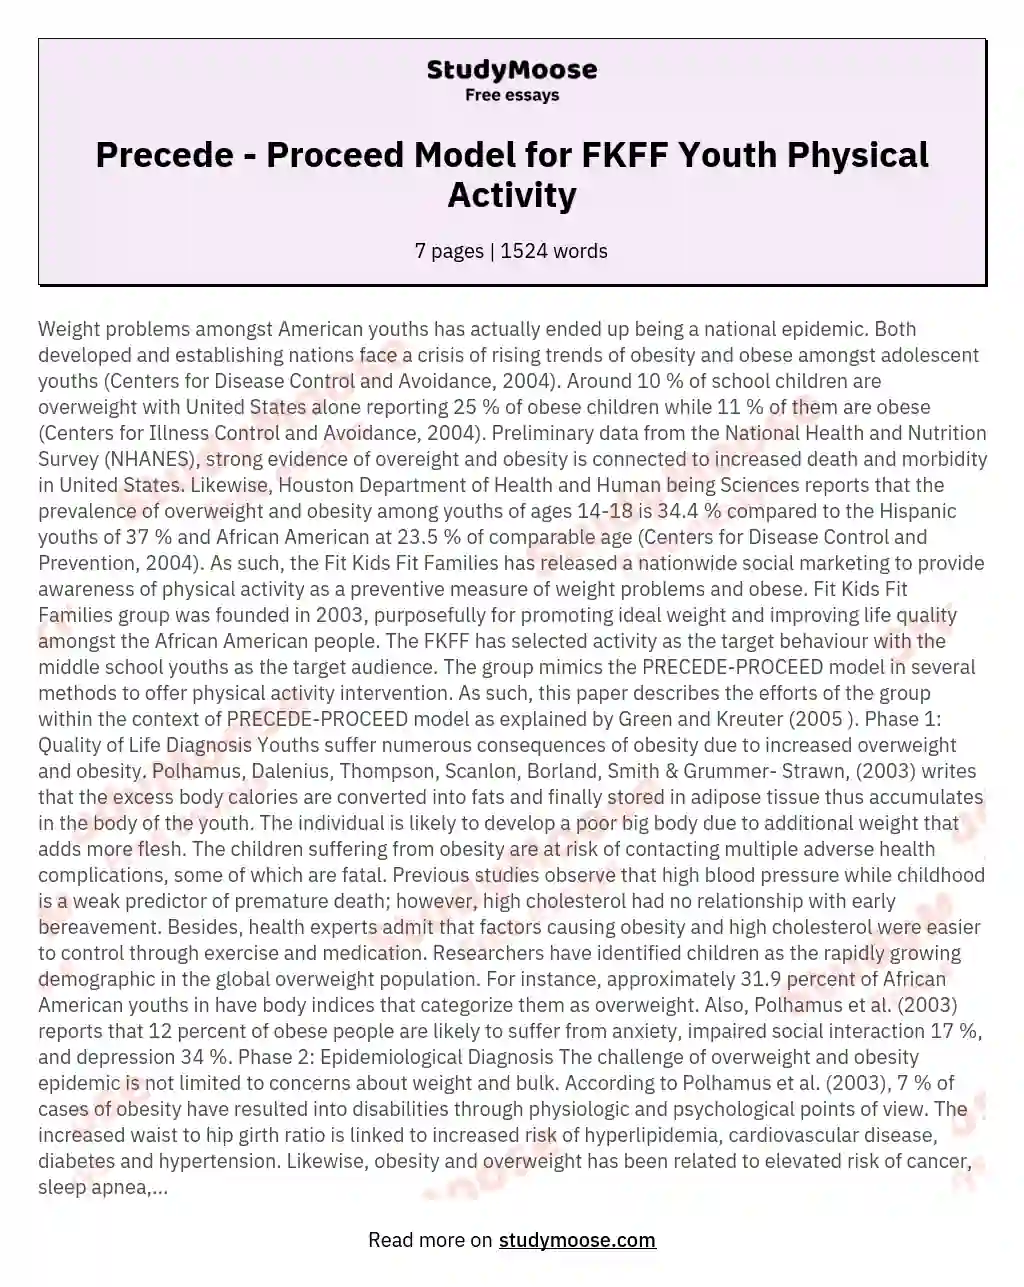 Application of the PRECEDE PROCEED Model to Fit Kids Fit Families FKFF Youth Physical Activity Campaign